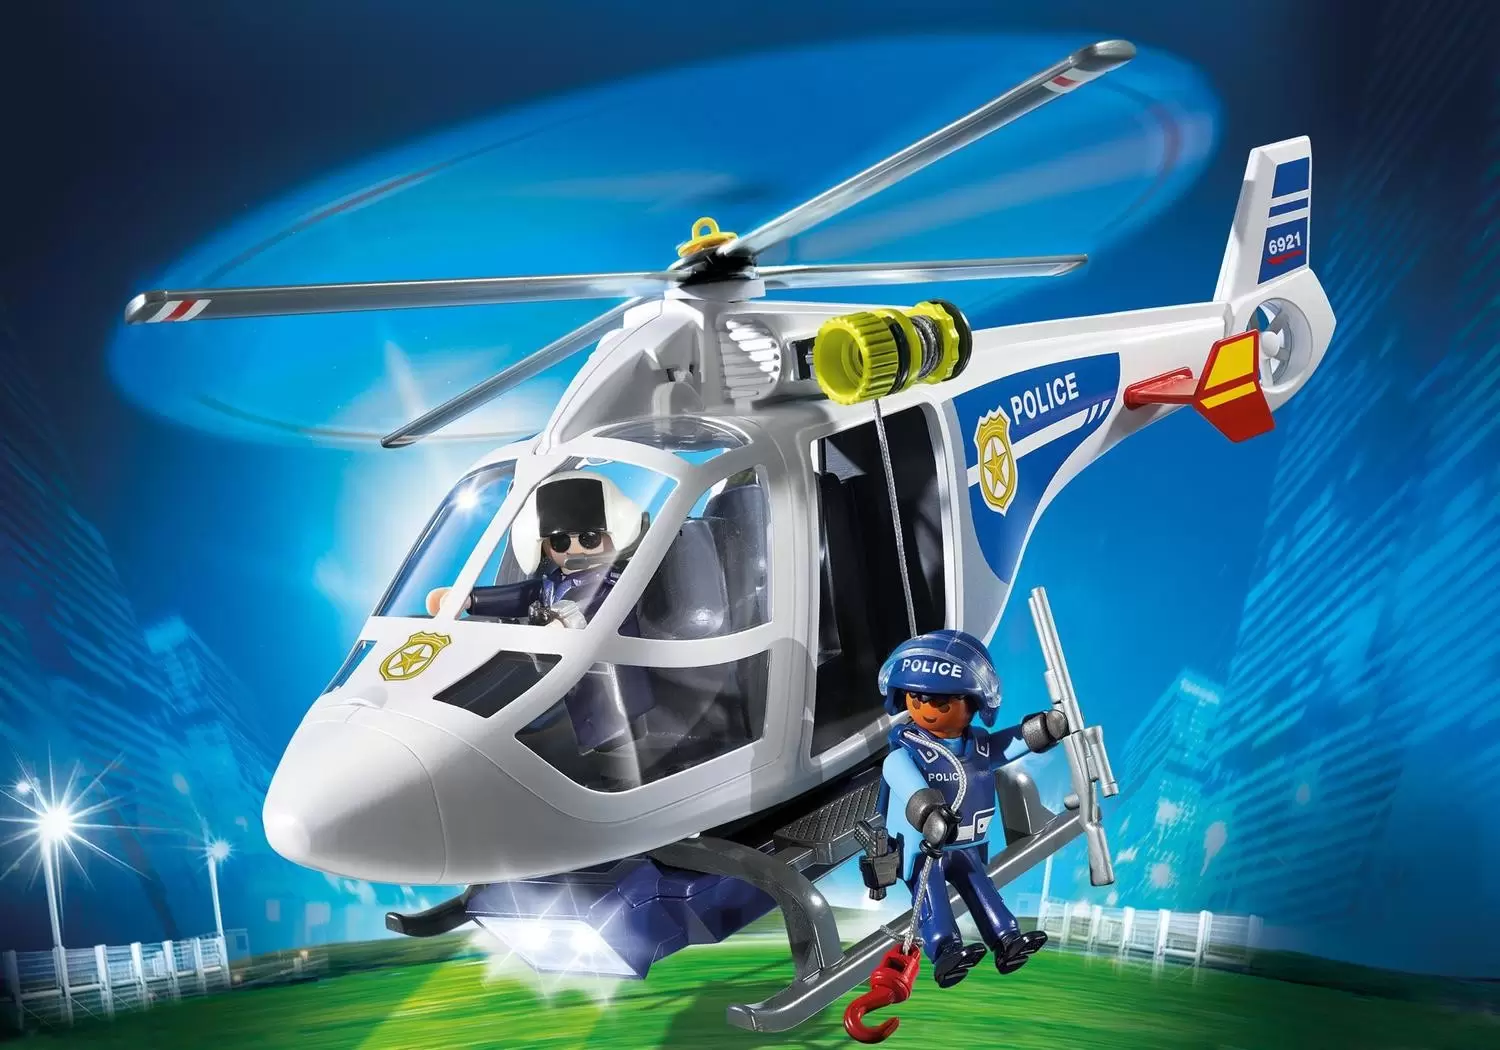 Police Playmobil - Police Helicopter with LED Searchlight